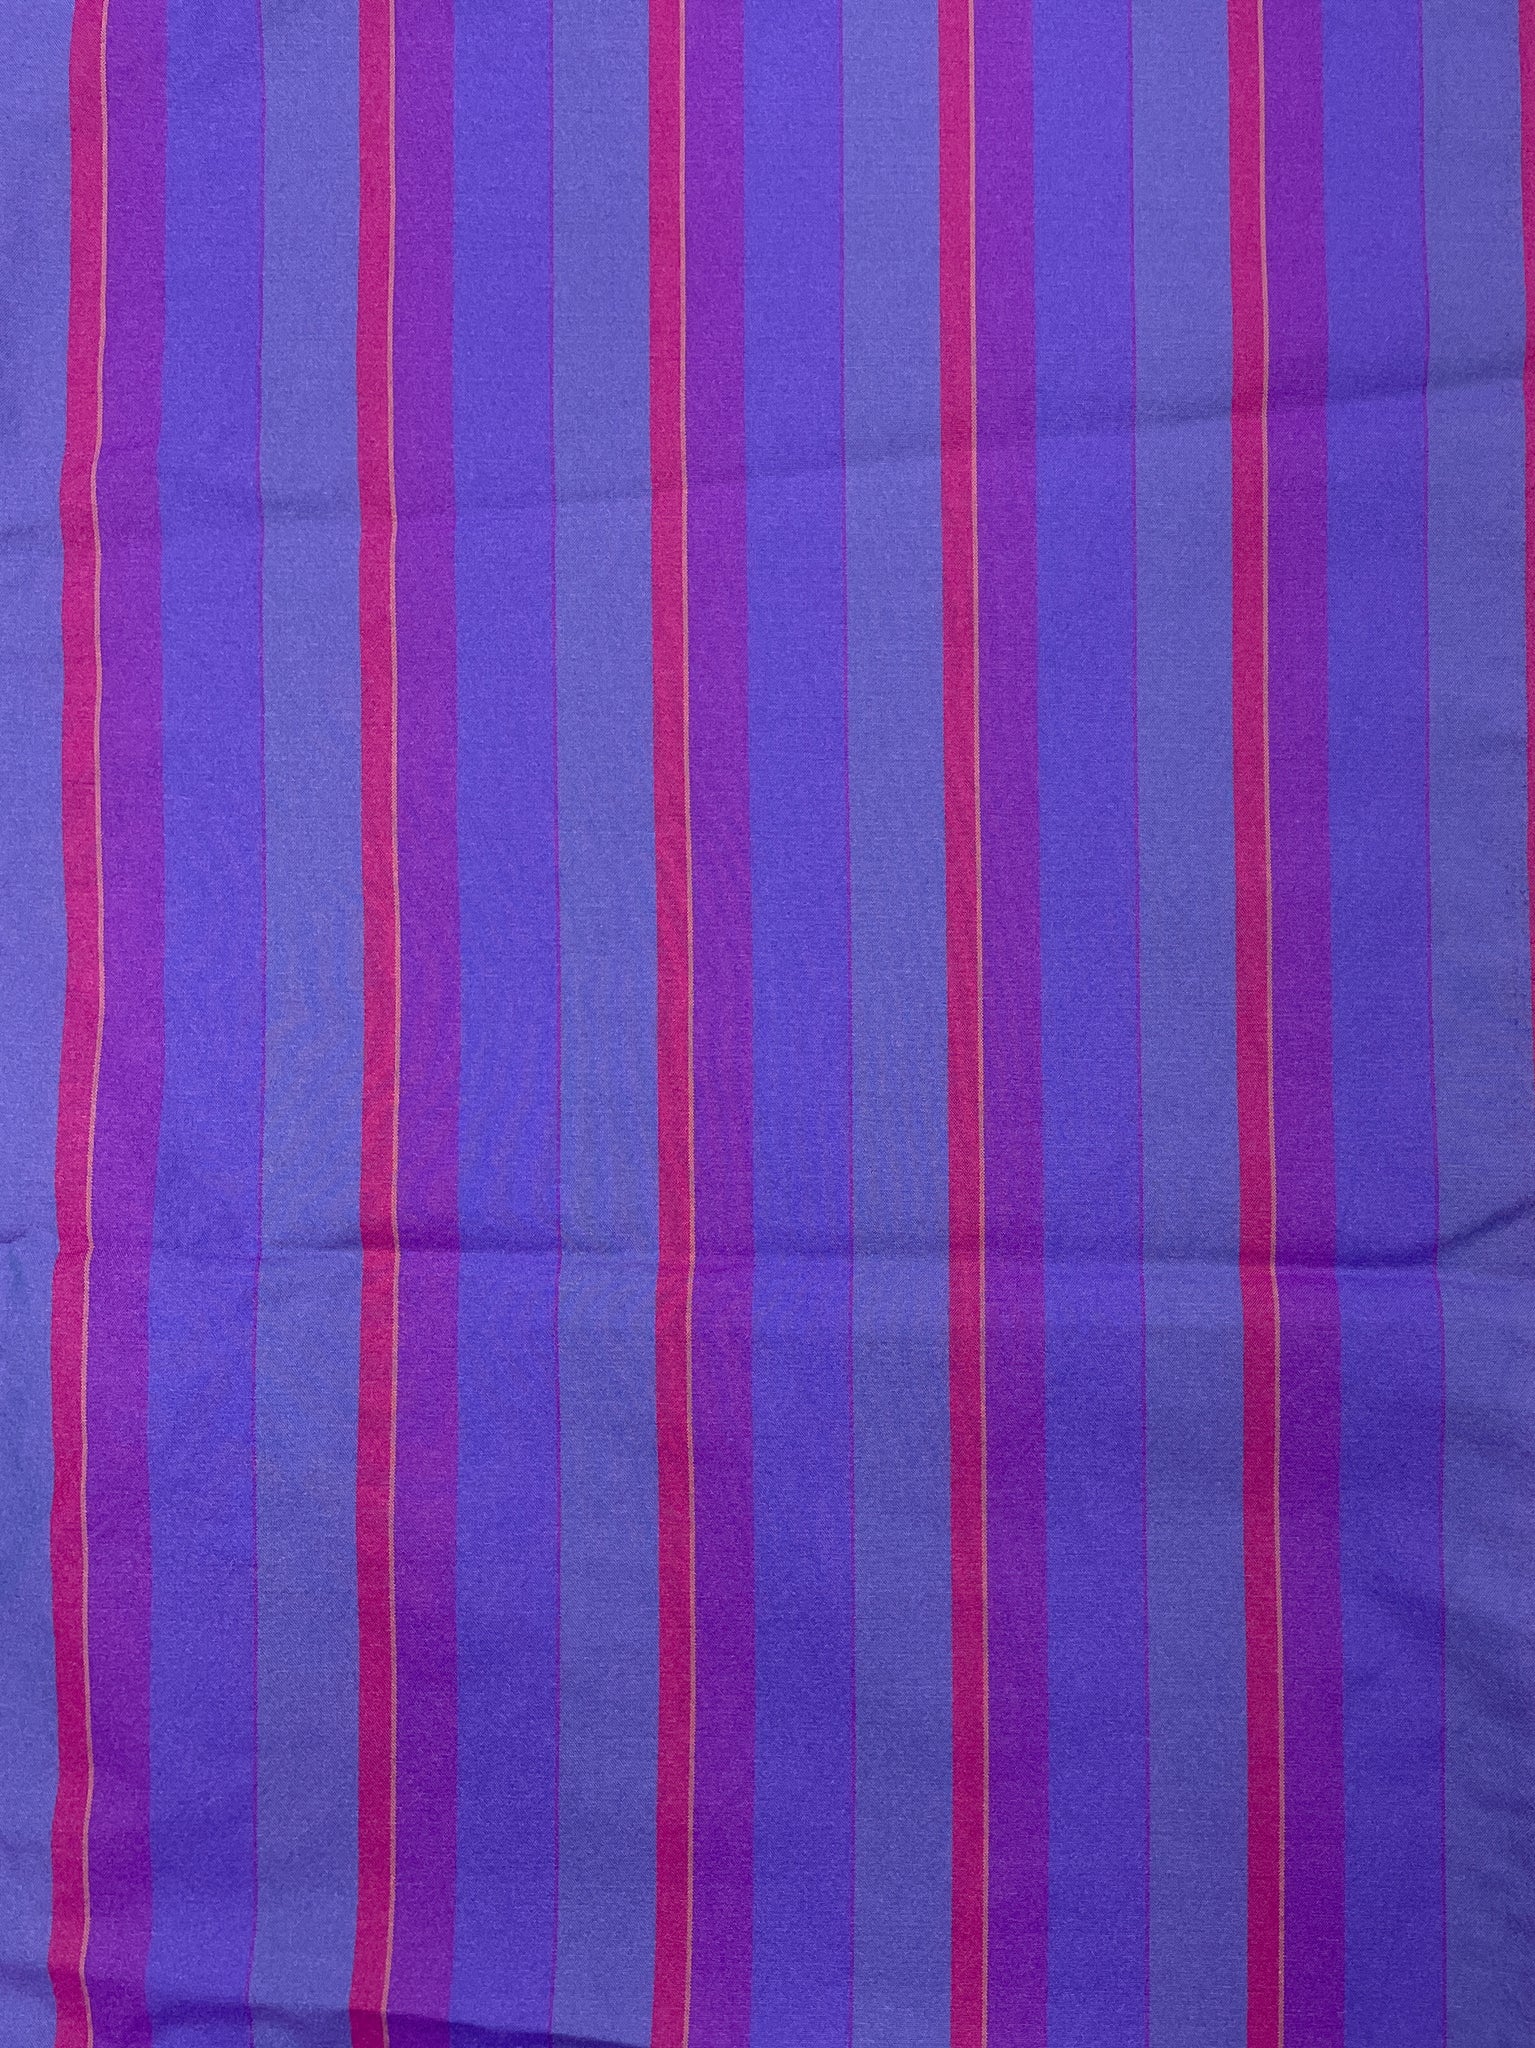 2 1/2 YD Polyester Yarn Dyed Stripes - Purples and Red